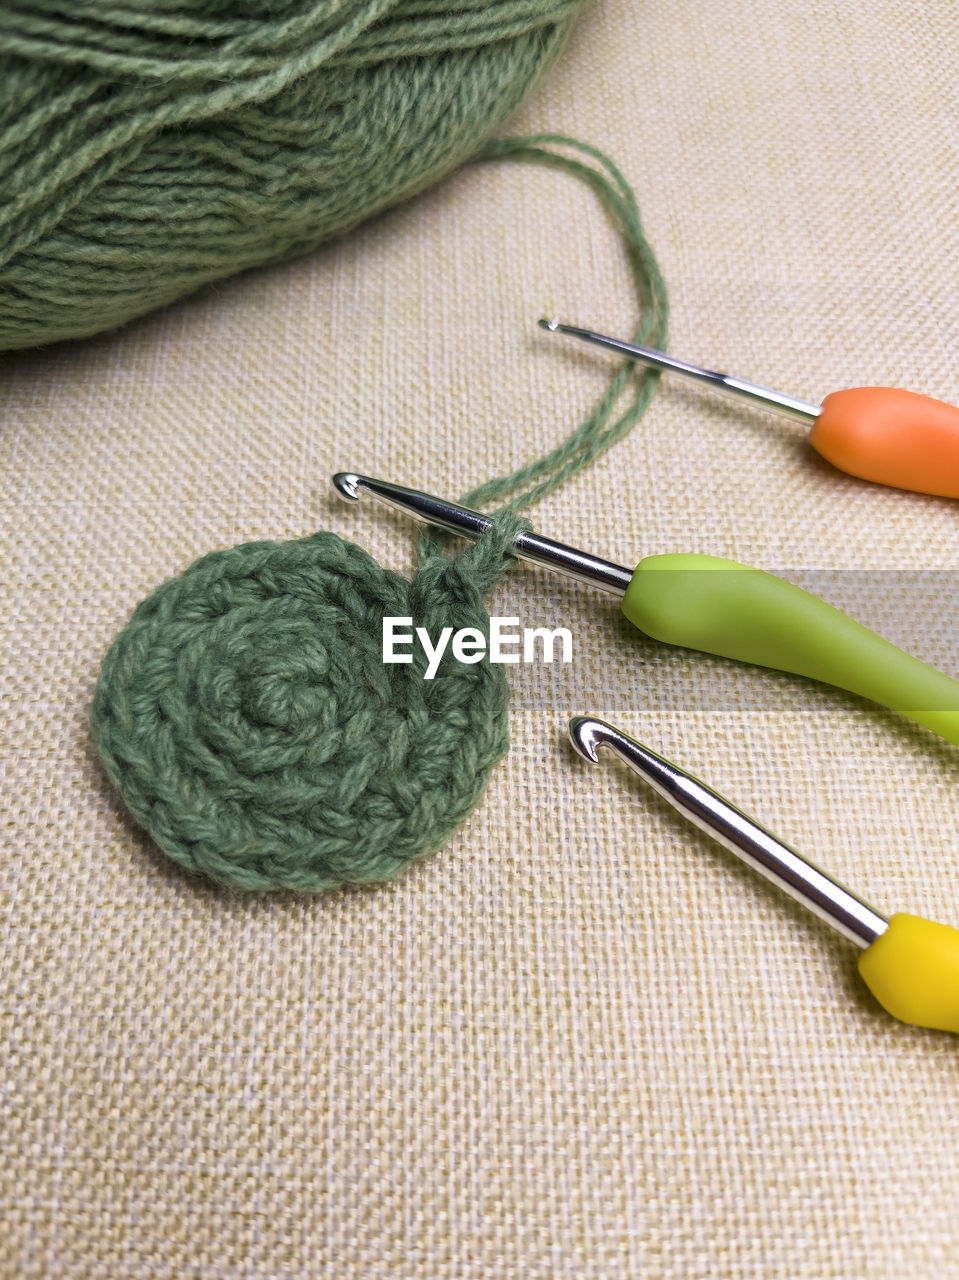 Green yarn thread with and three colorful hooks for knitting and hobbies on gray fabric background.